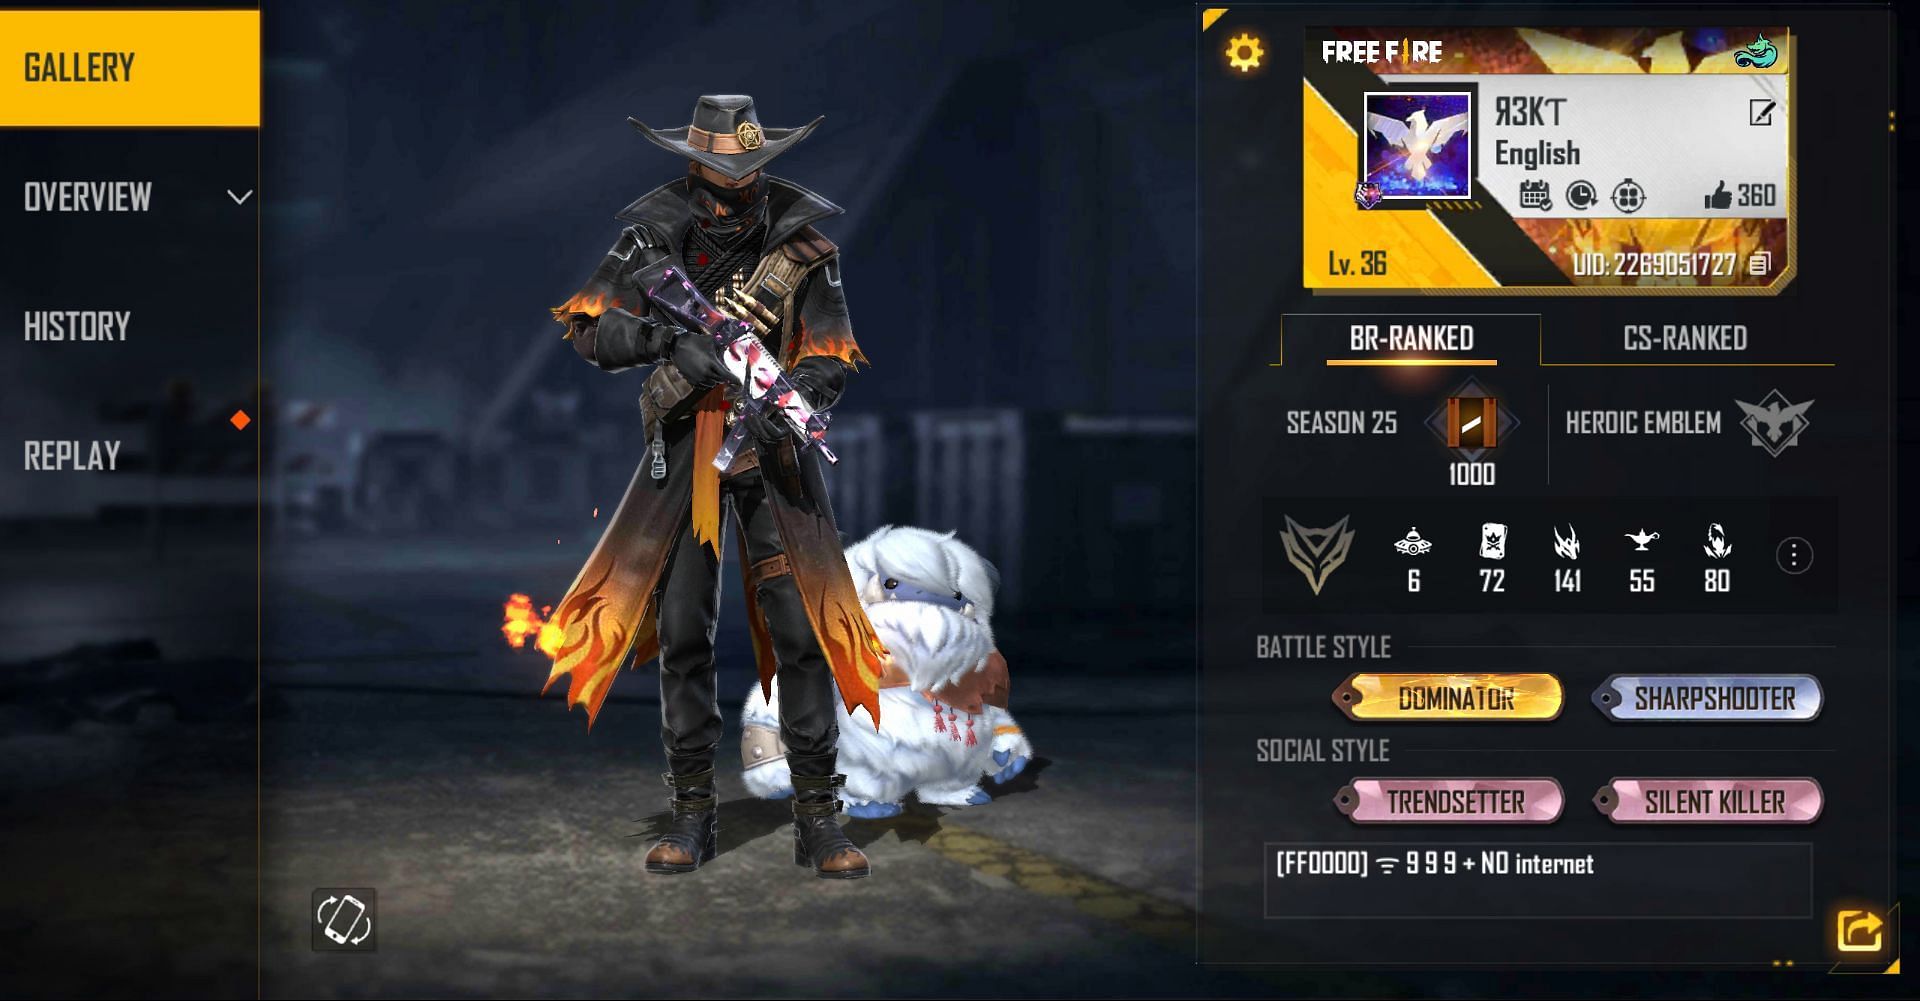 Players can click on the gear icon (Image via Free Fire)